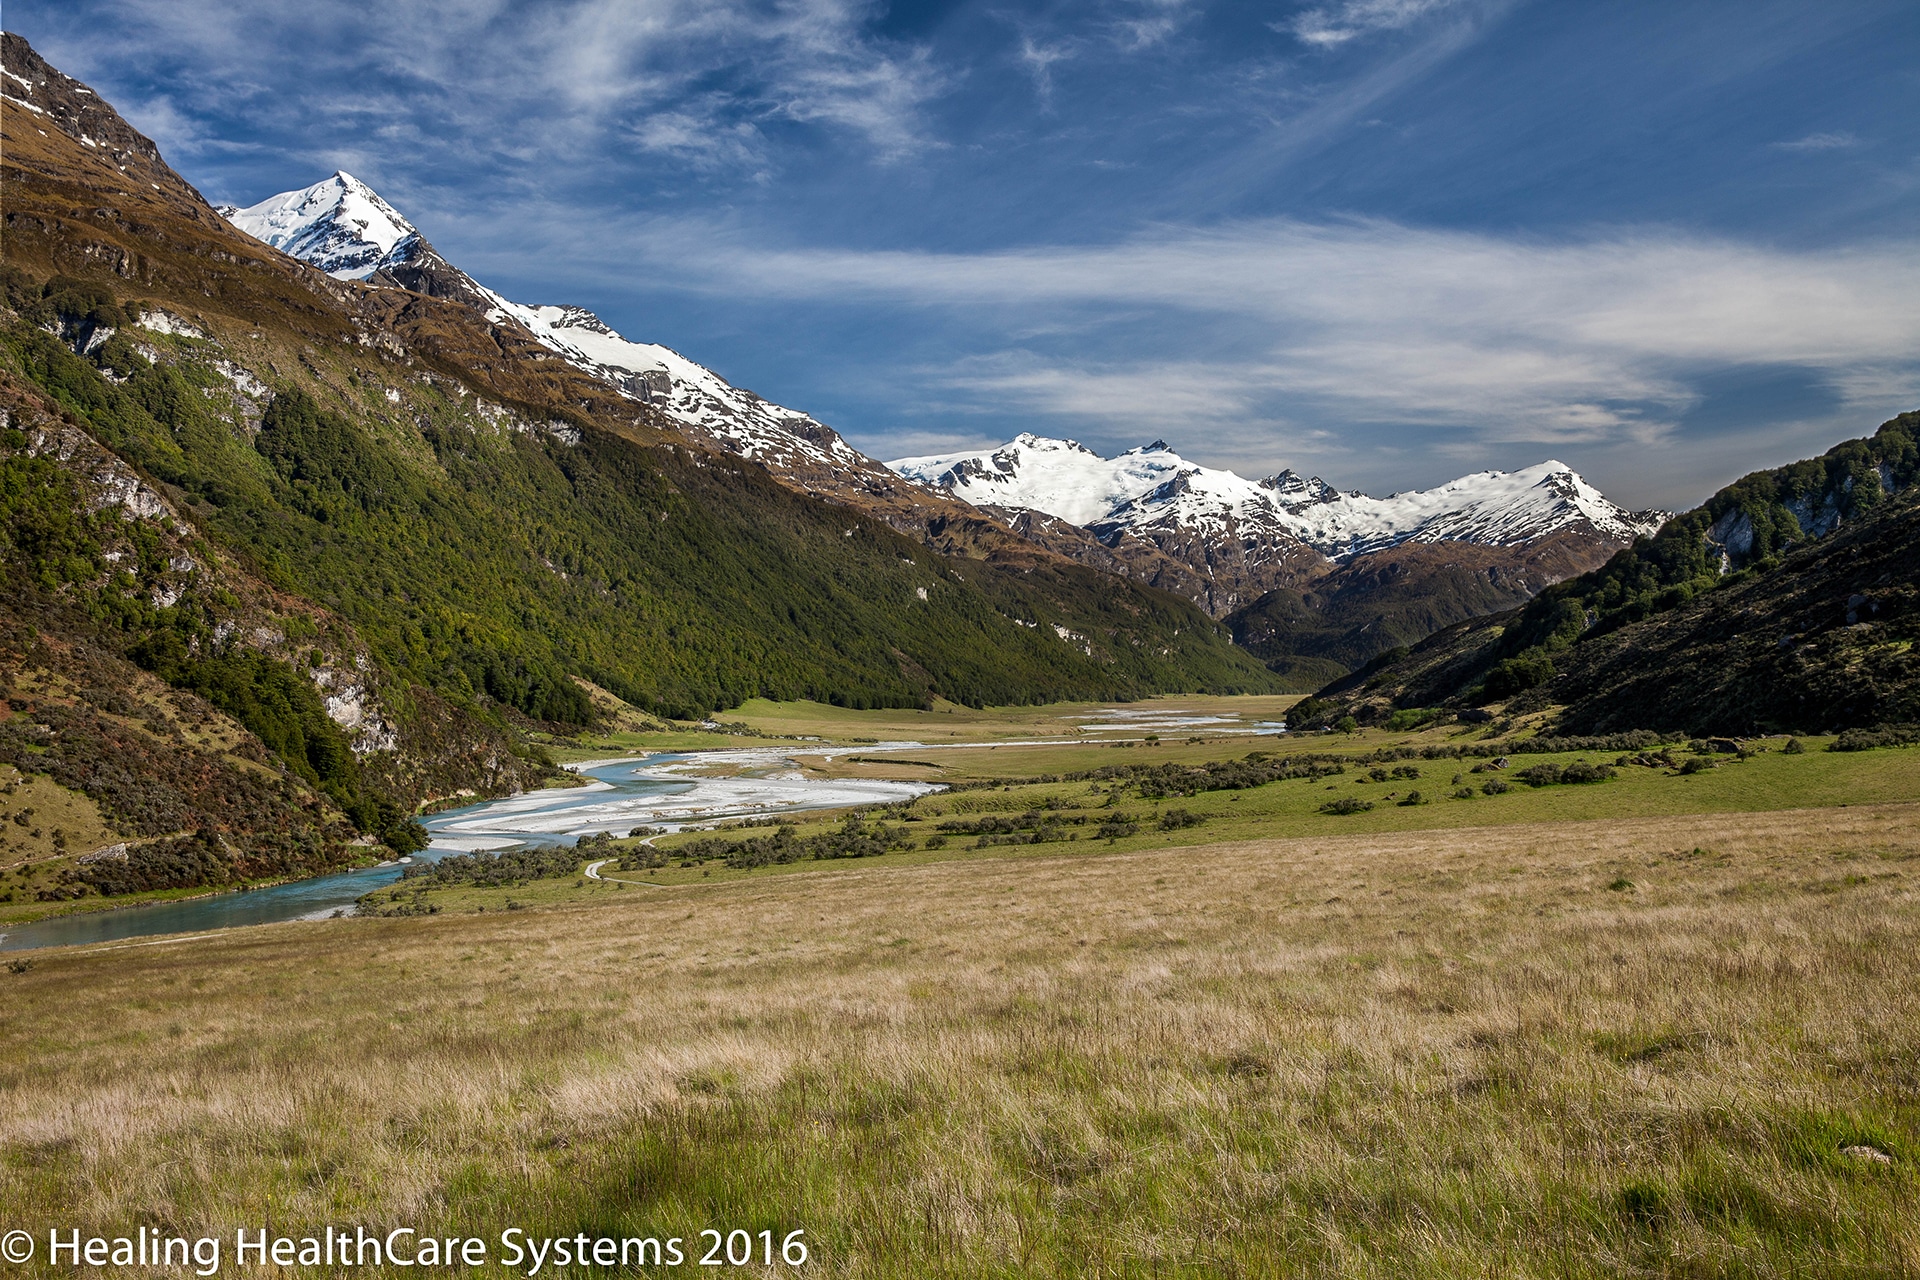 The braided rivers winding through Rees Valley.